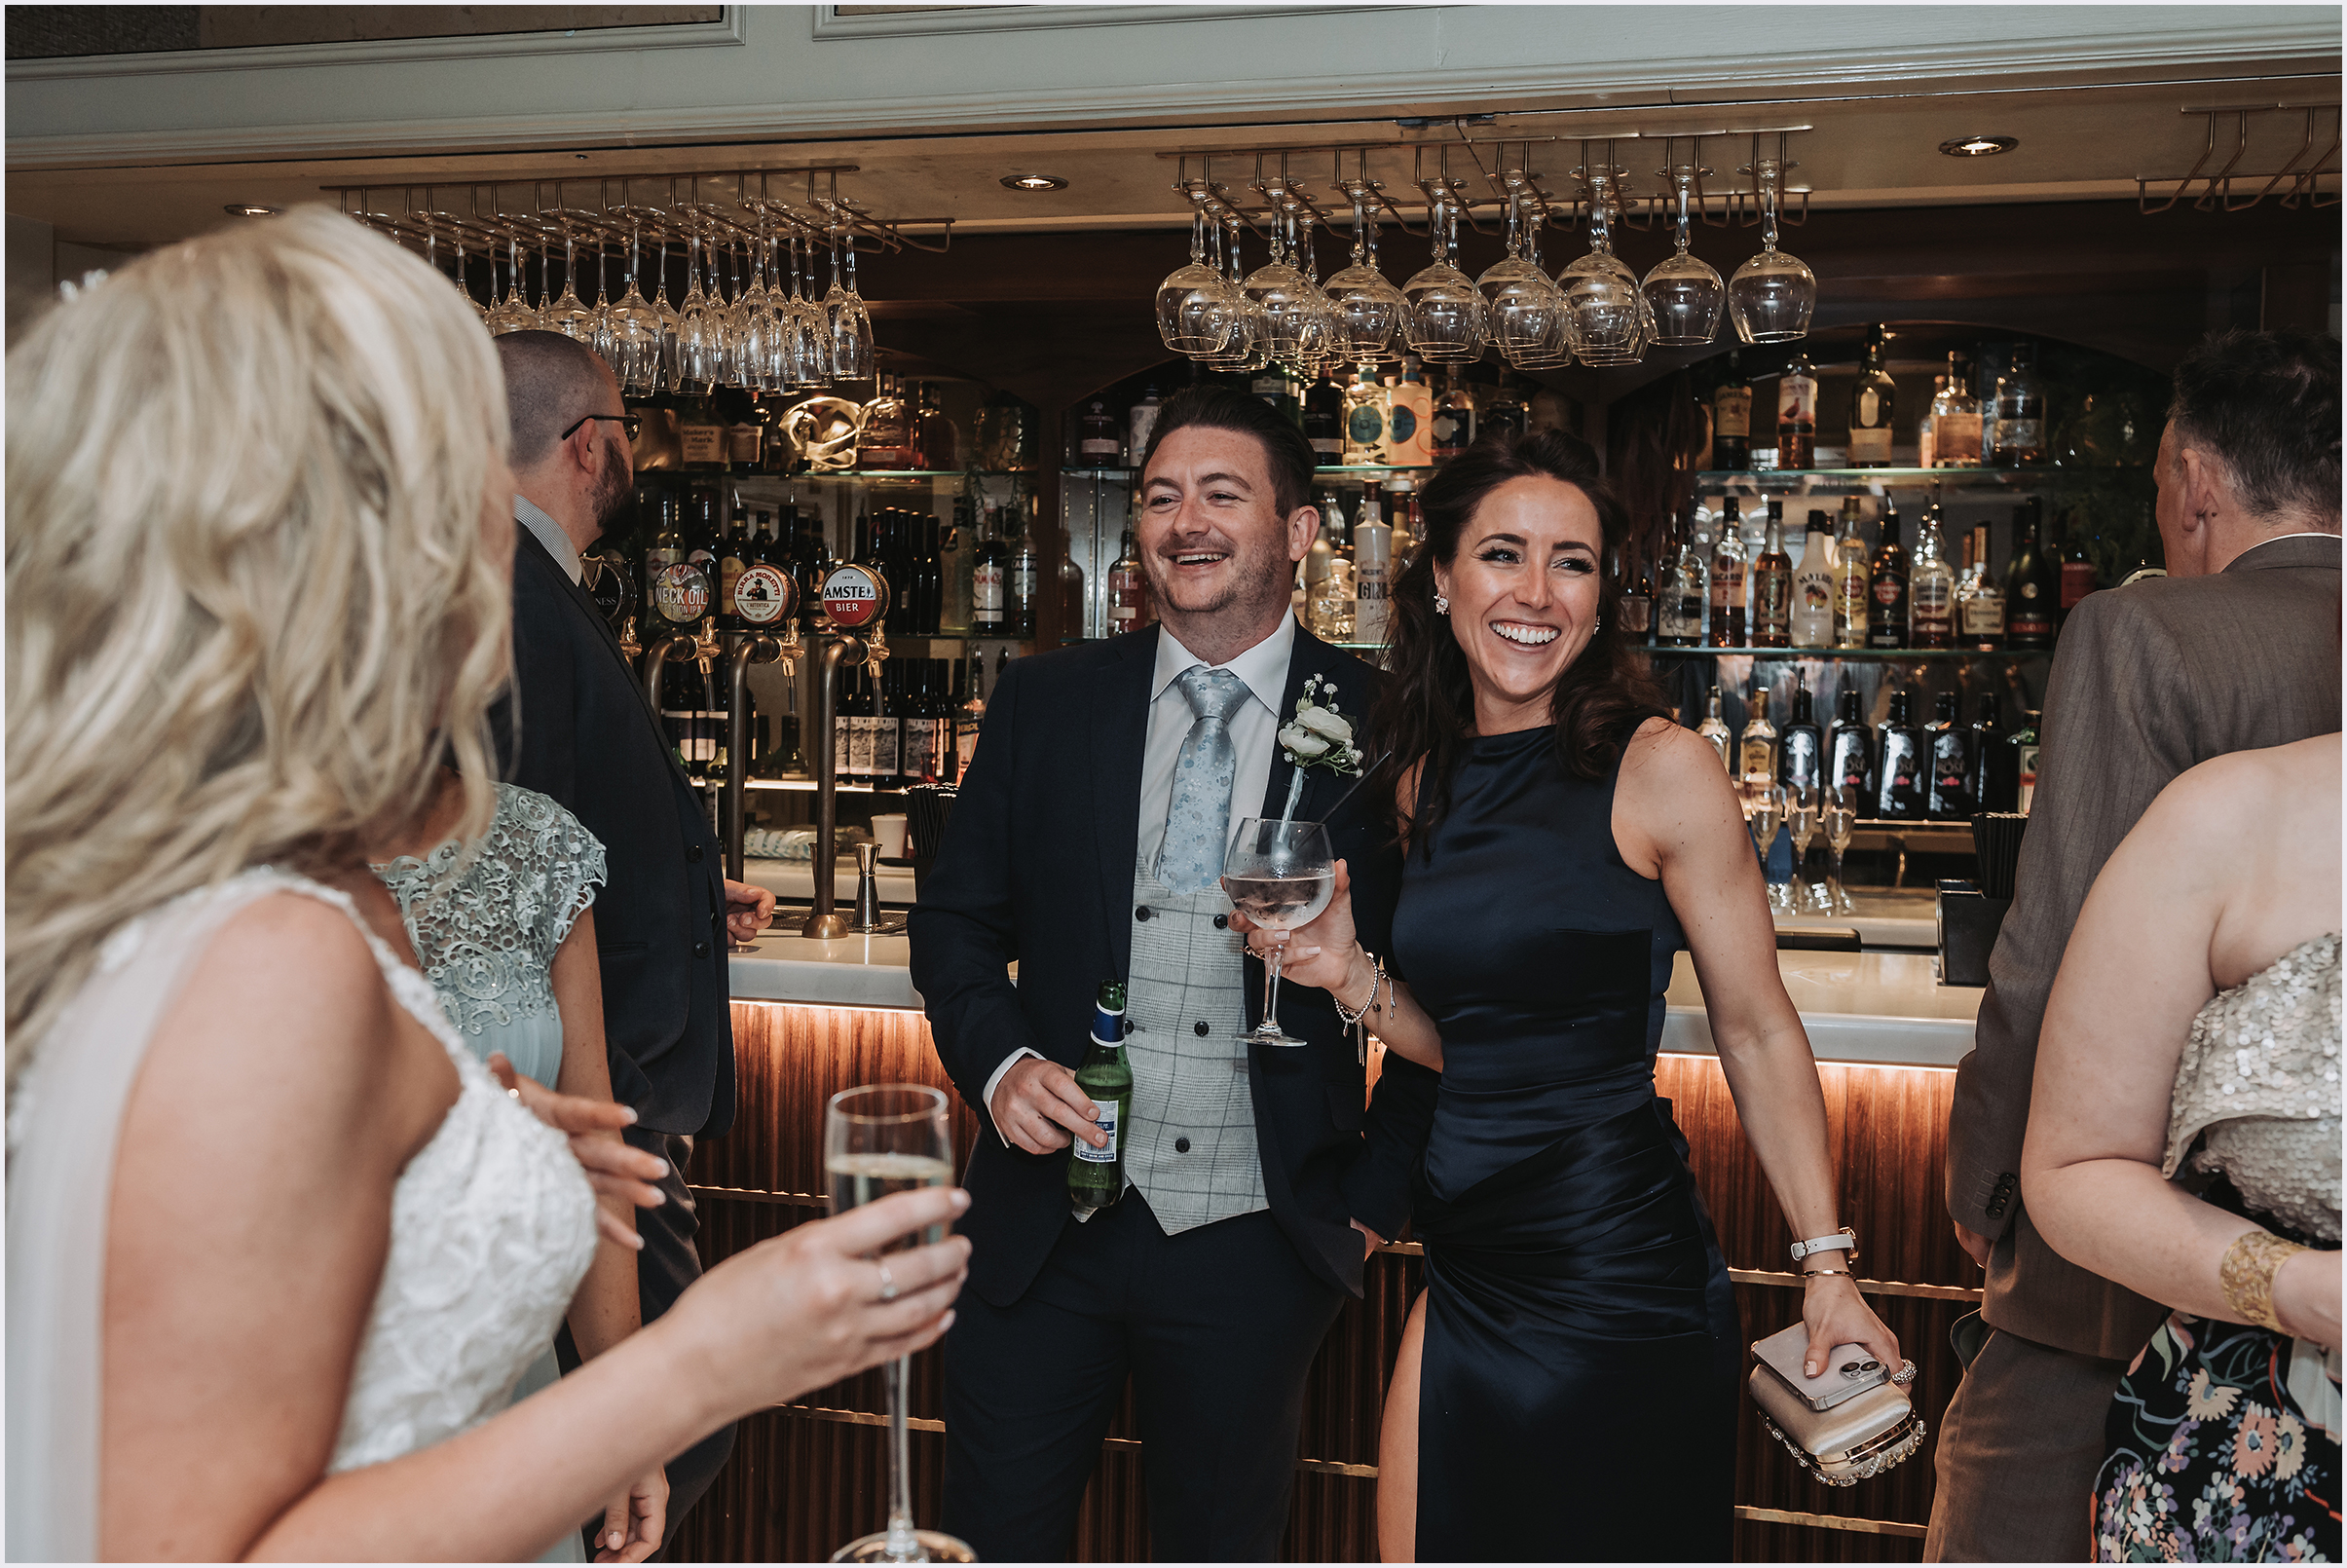 Guests enjoying themselves at the bar during the drinks reception at The Grosvenor Pulford Hotel and Spa.